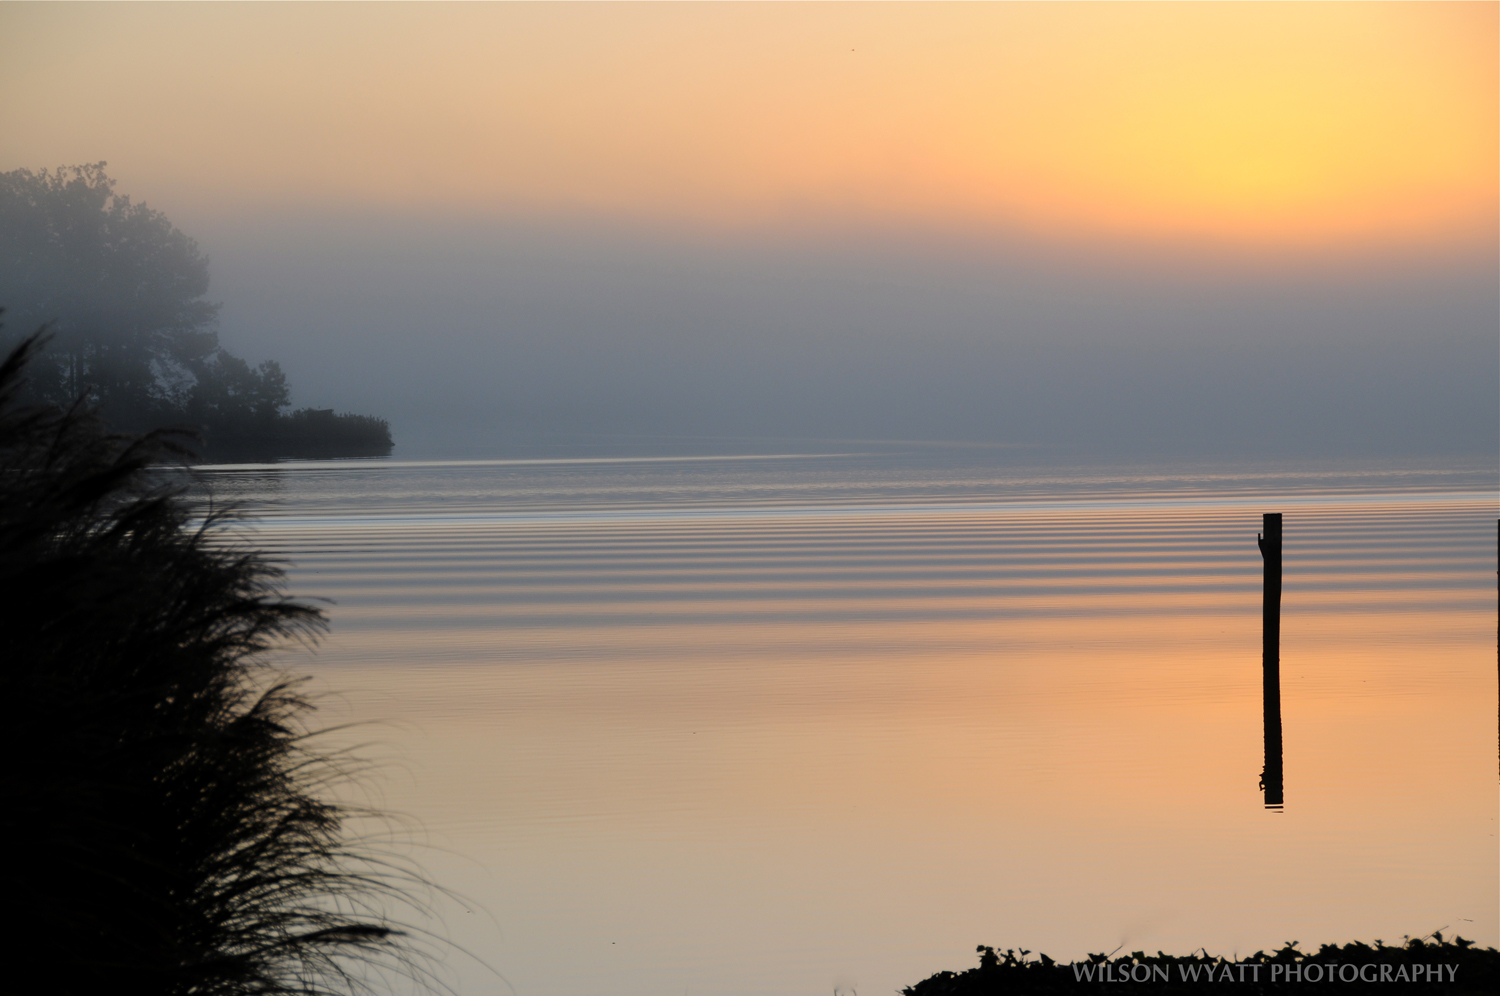 November Reflection, from "Chesapeake Views - Catching the Light" - click on image for a larger view